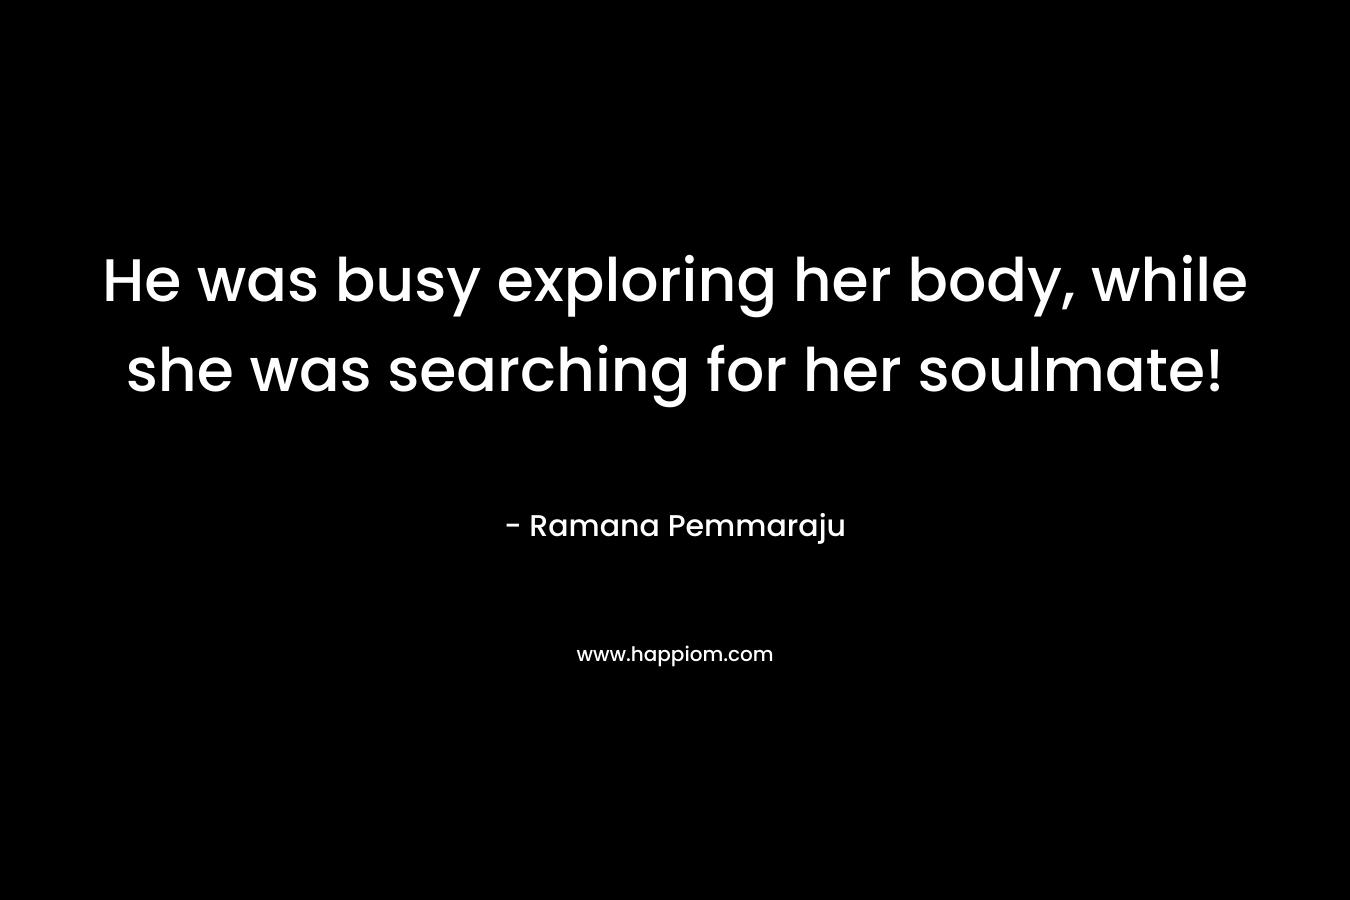 He was busy exploring her body, while she was searching for her soulmate!